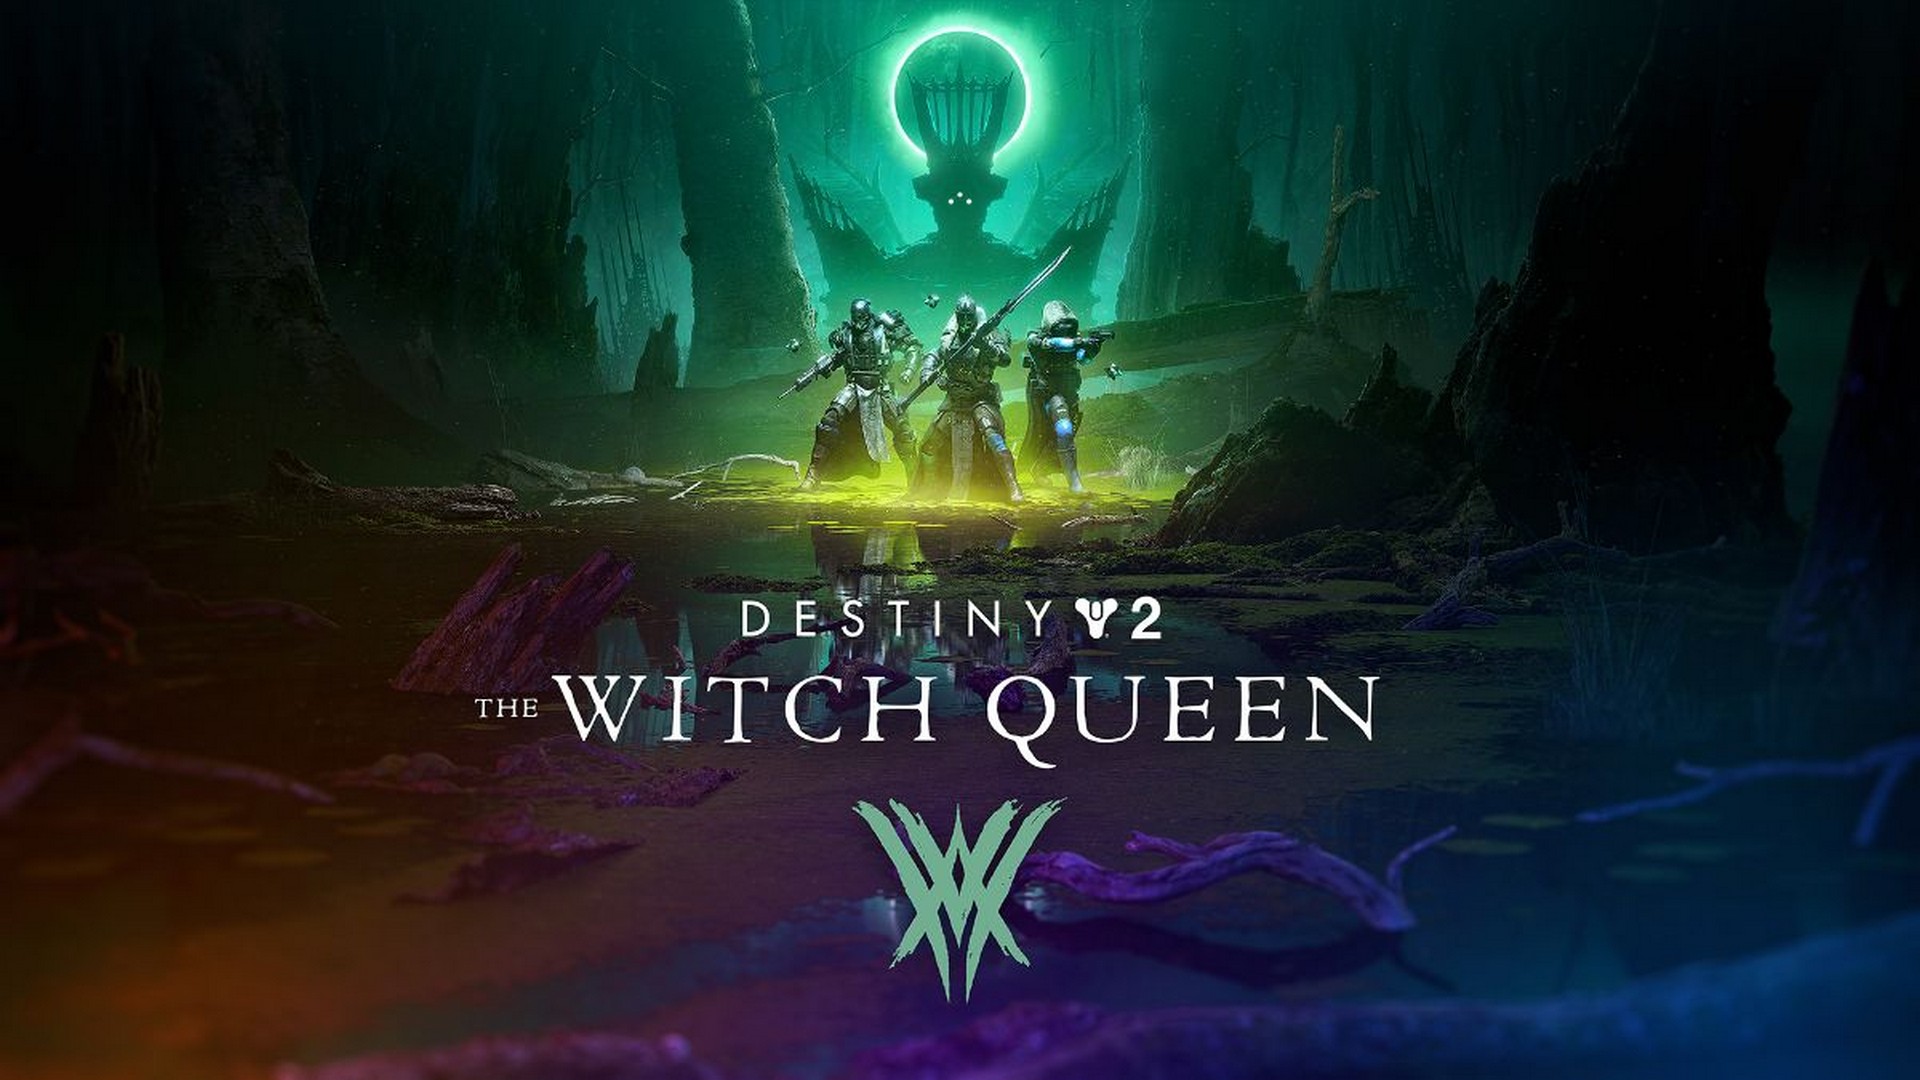 Bungie Releases Behind-The-Scenes Footage Of Destiny 2: The Witch Queen In New ViDoc